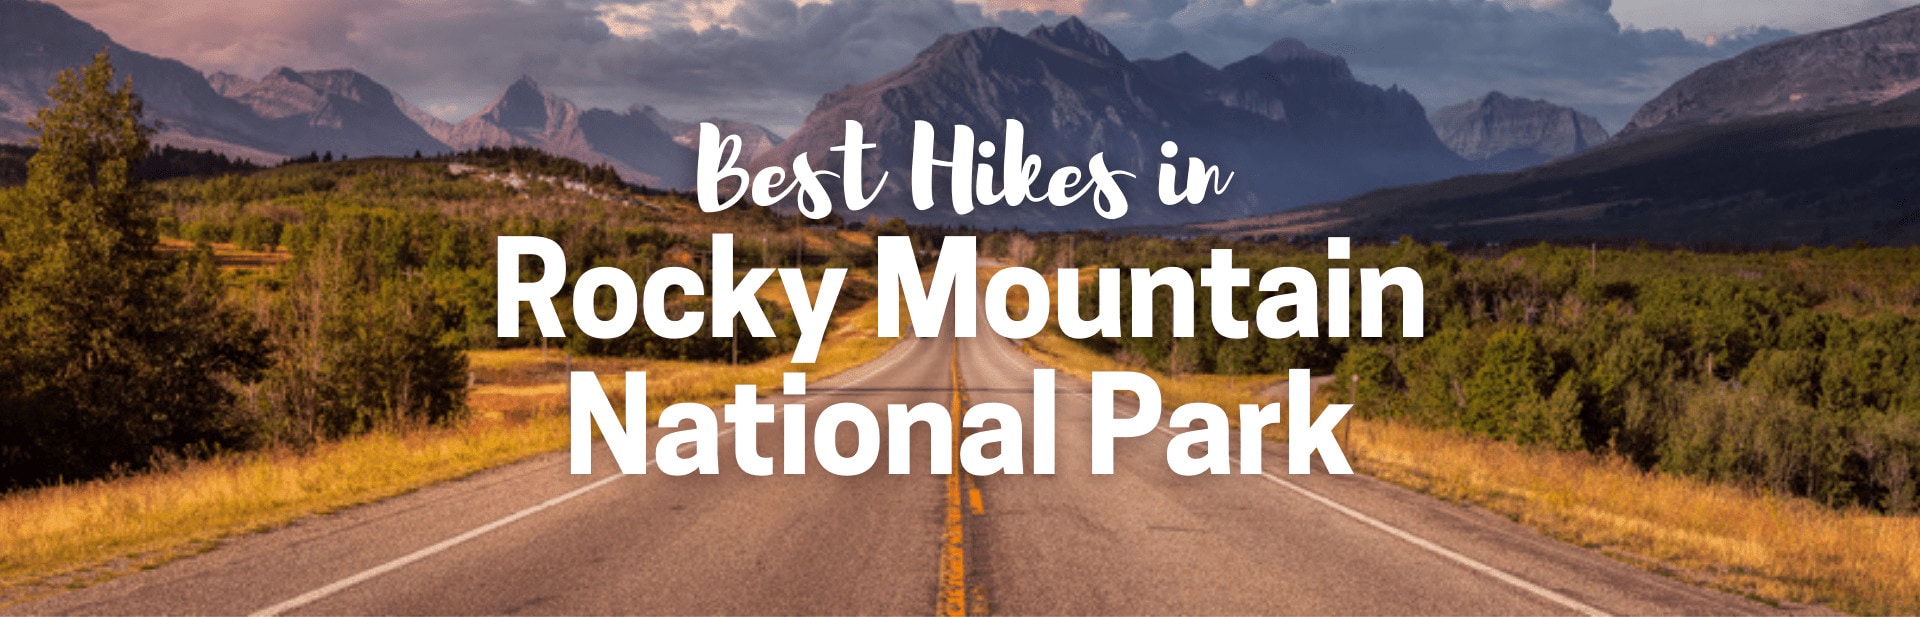 Conquer the Rockies: 12 Best Hikes & Tips for Rocky Mountain National Park